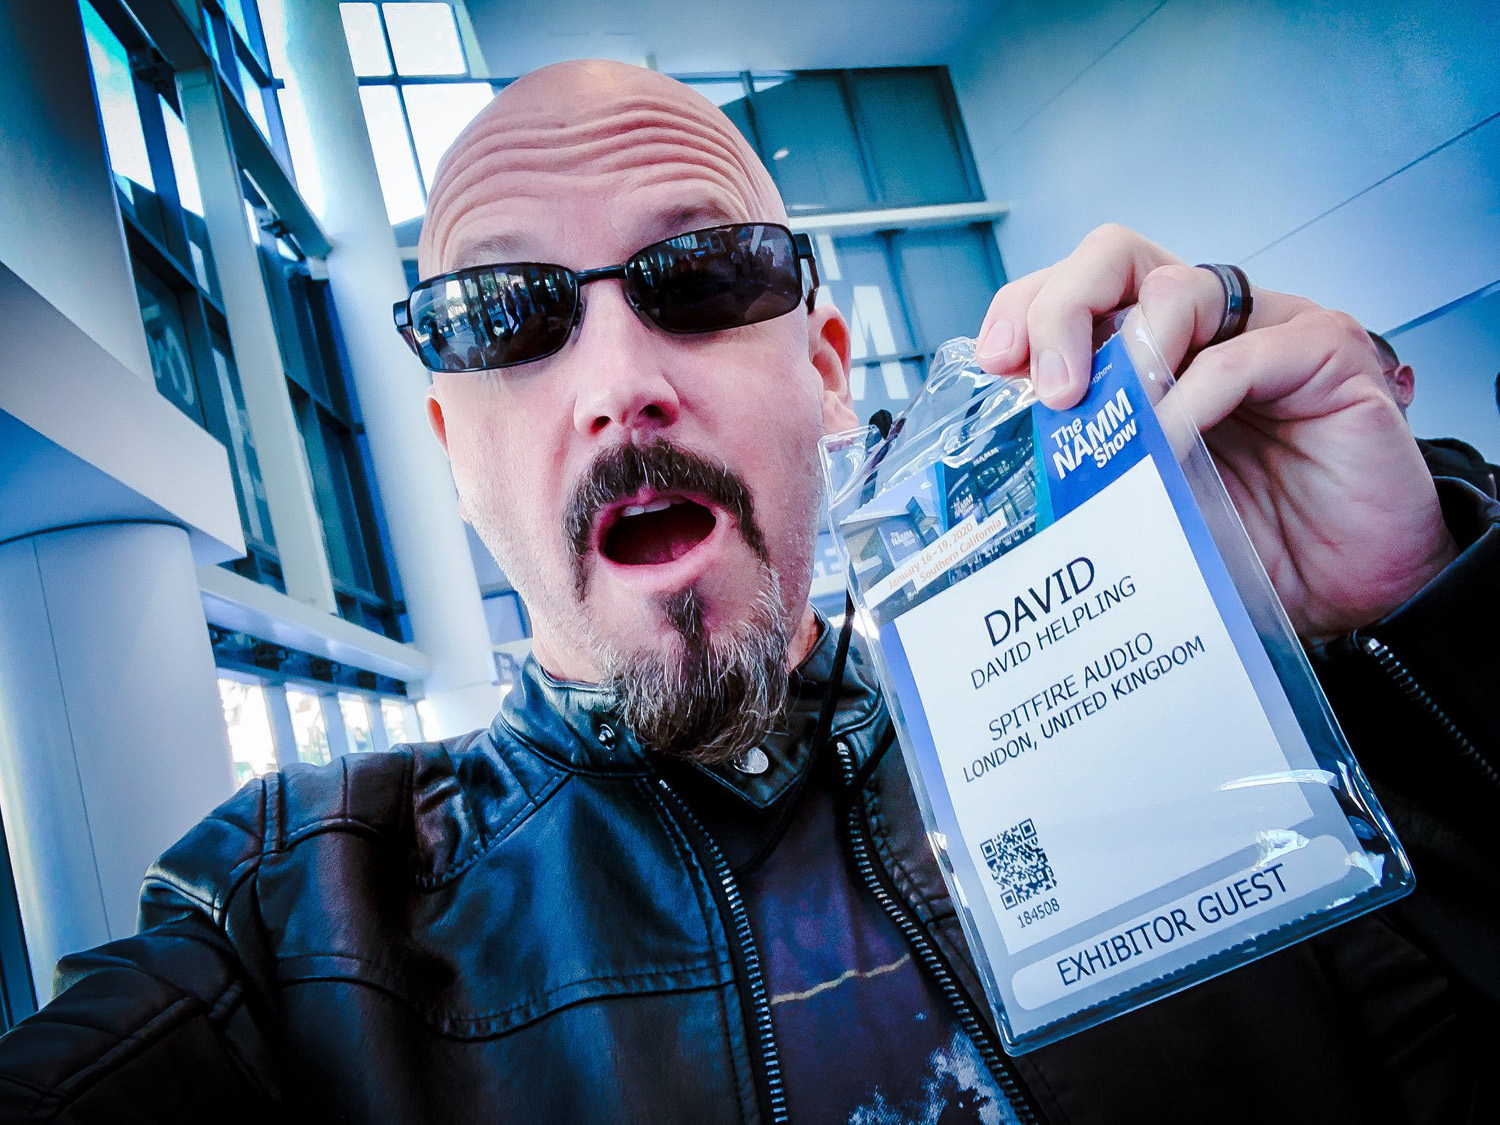 DAVID IS STOKED TO ATTEND THE NAMM SHOW IN LOS ANGELES WITH SAMPLE LEGENDS SPITFIRE AUDIO